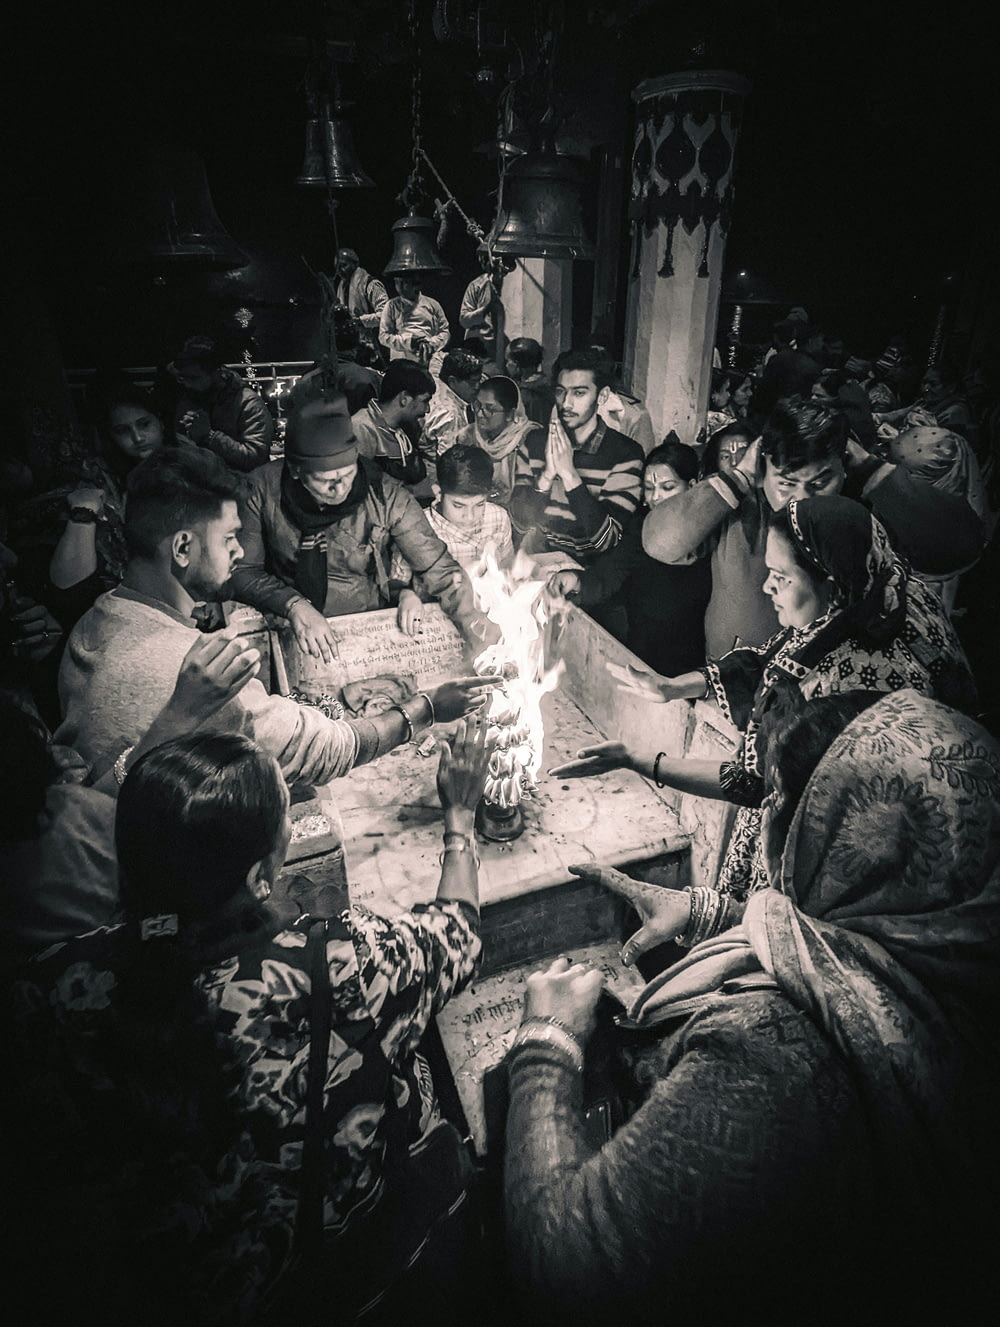 a group of people sitting around a table